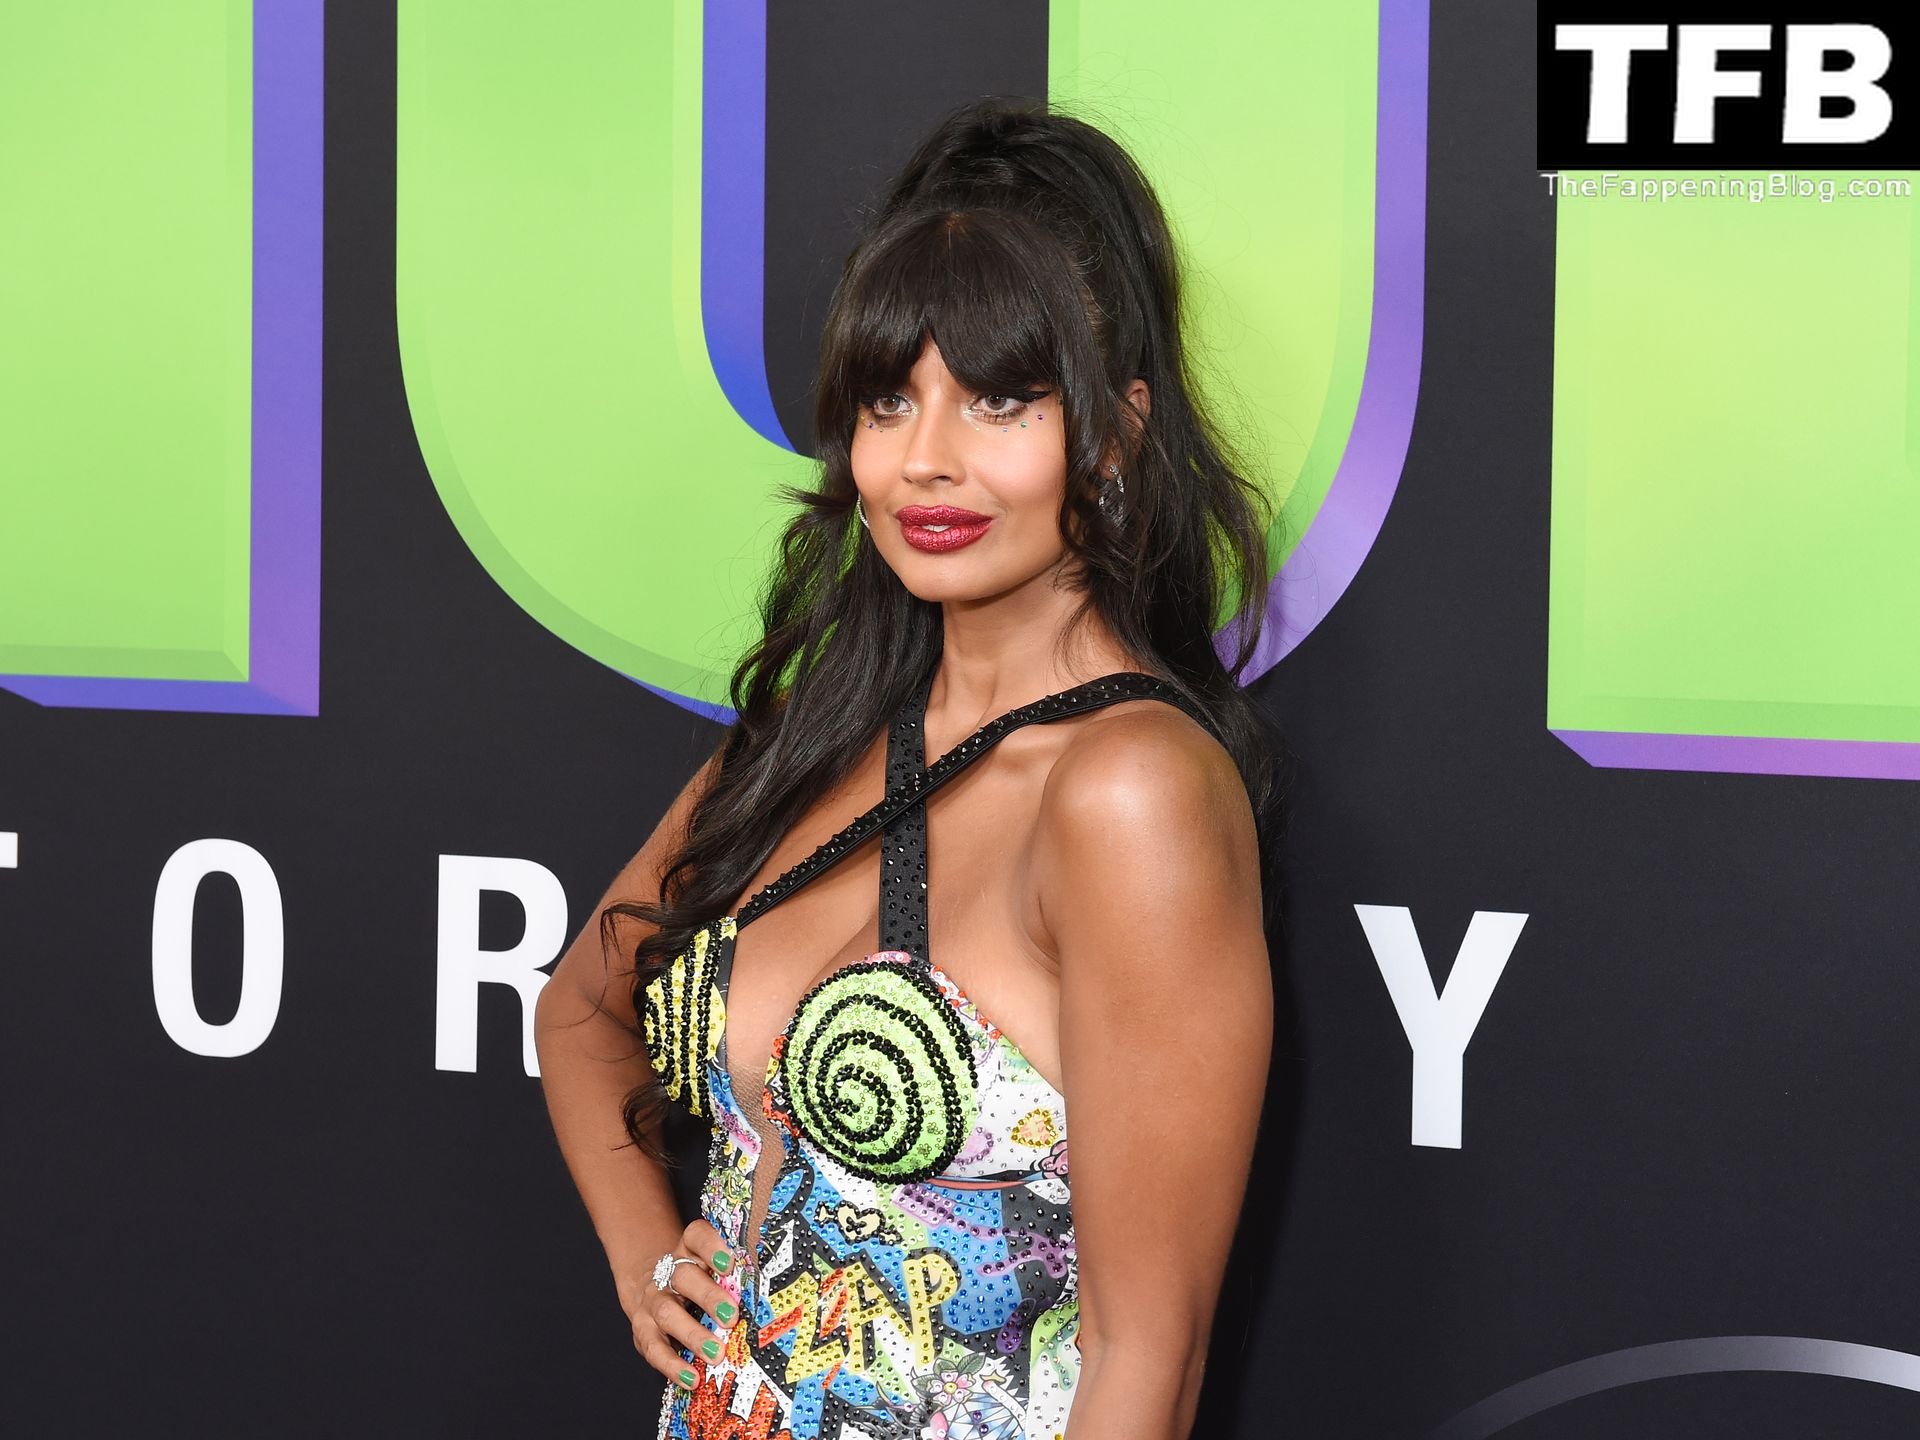 Jameela Jamil Sexy The Fappening Blog 29 - Jameela Jamil Flaunts Her Big Tits at the Premiere of Disney+’s “She Hulk: Attorney at Law” in LA (53 Photos)